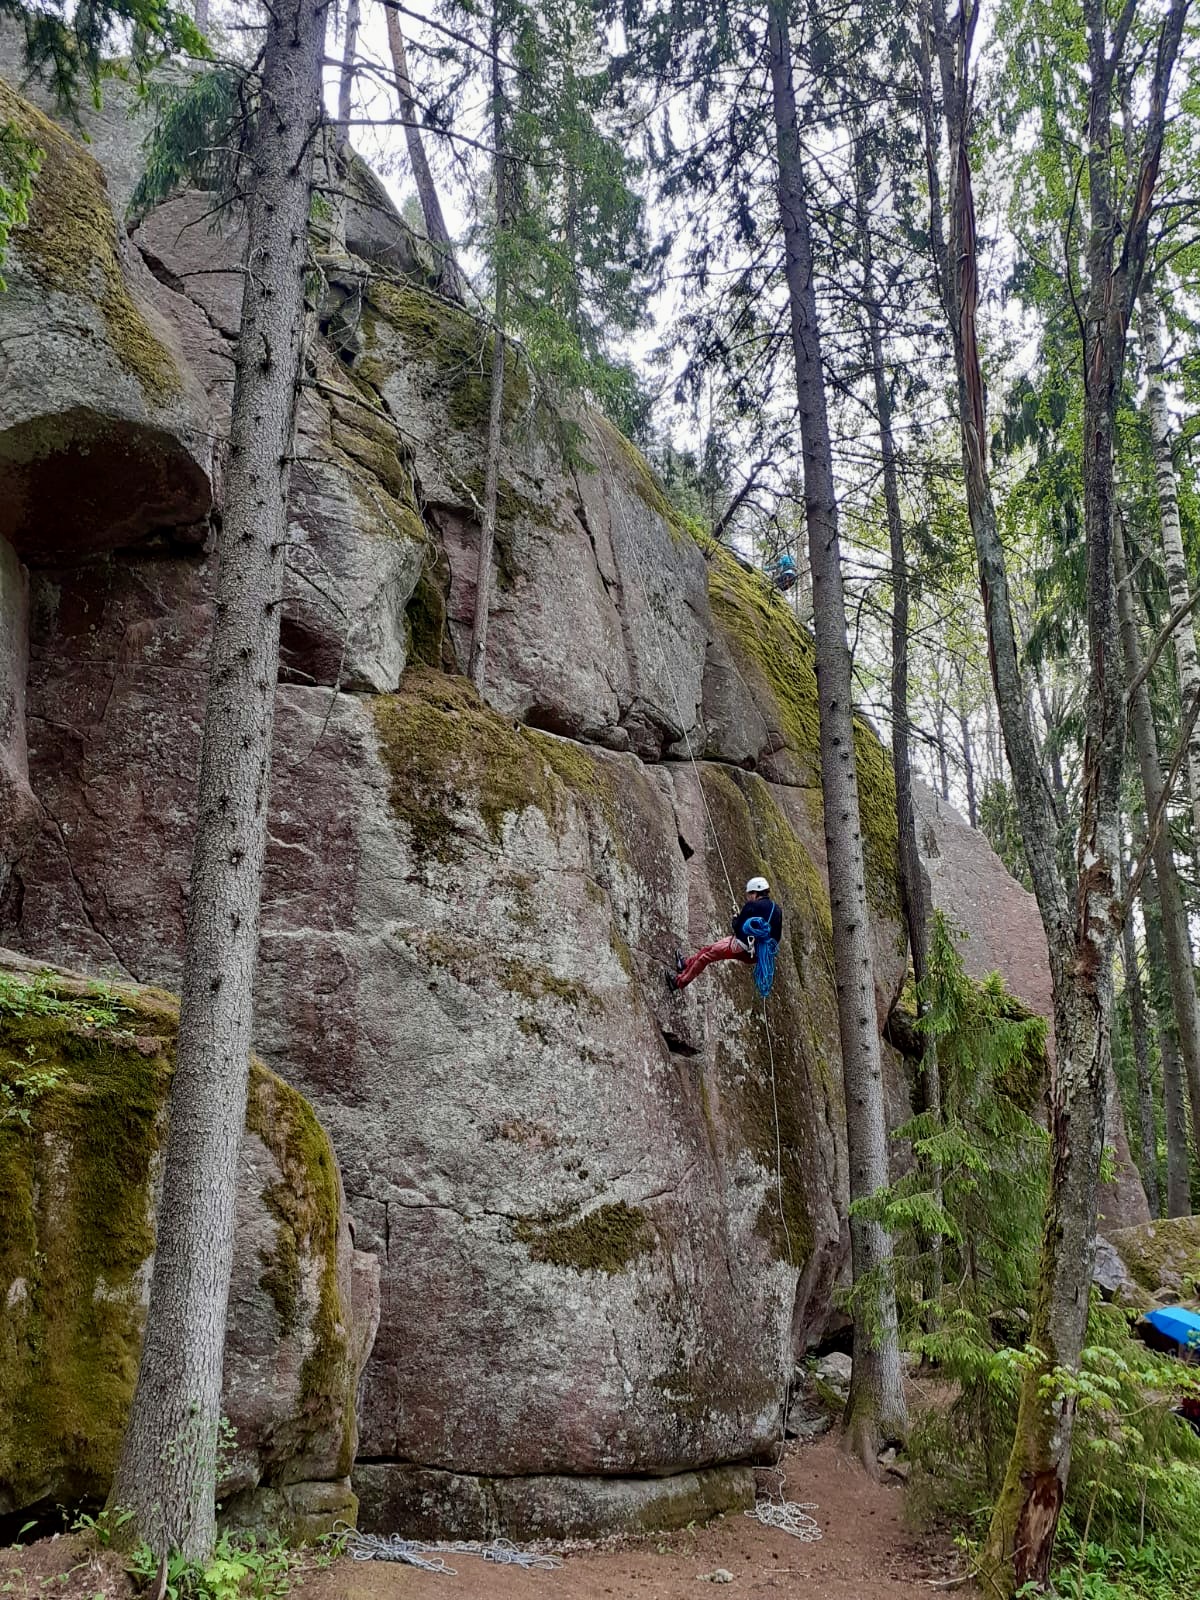 A person is rappeling down a tall rock wall in a forest